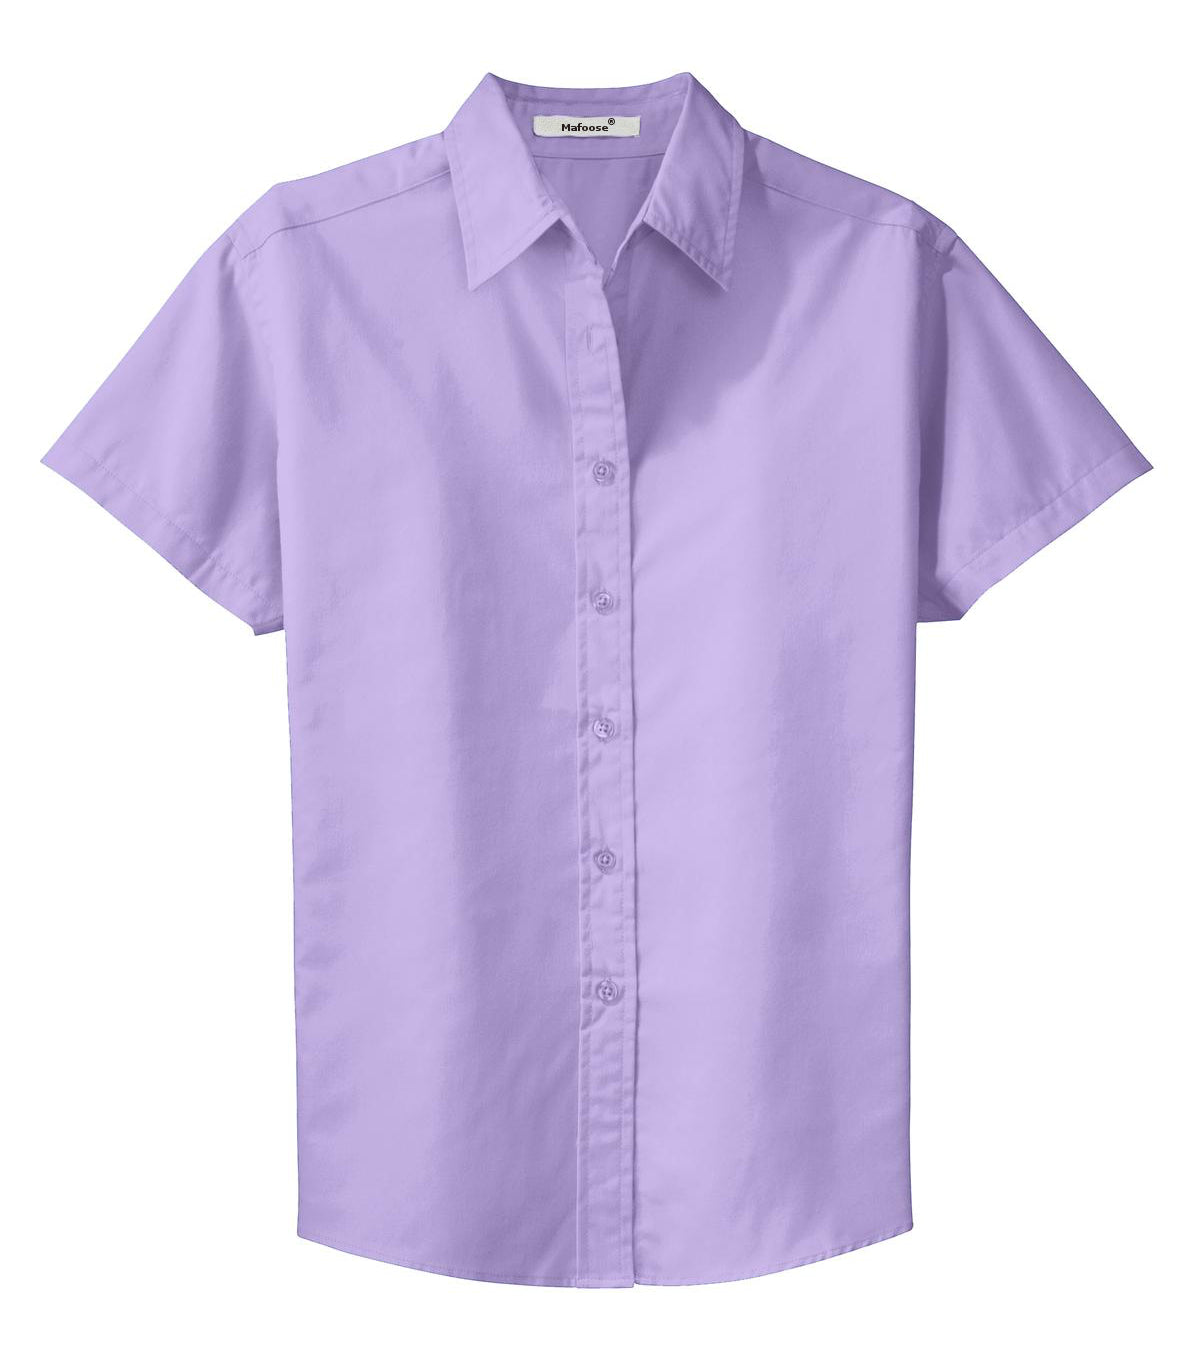 Mafoose Women's Comfortable Short Sleeve Easy Care Shirt Bright Lavender-Front